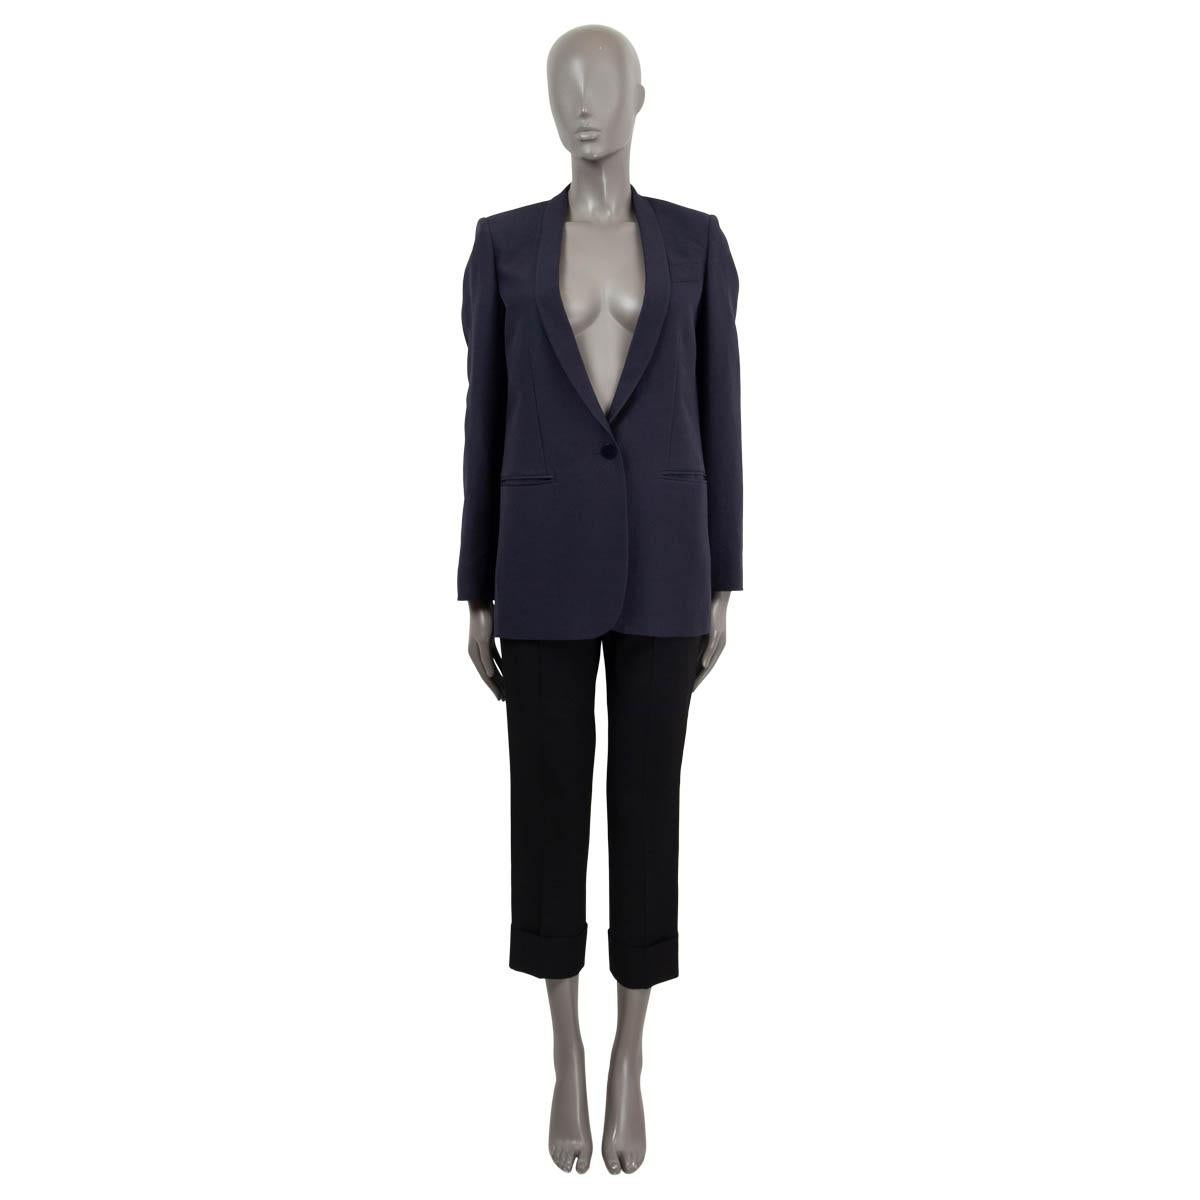 100% authentic Stella McCartney shawl collar one single button blazer in navy wool (69%) and silk (31%). Features two slit pockets on the front and one chest pocket. Lined in rayon (52%) and cotton (48%). Has been worn and is in excellent